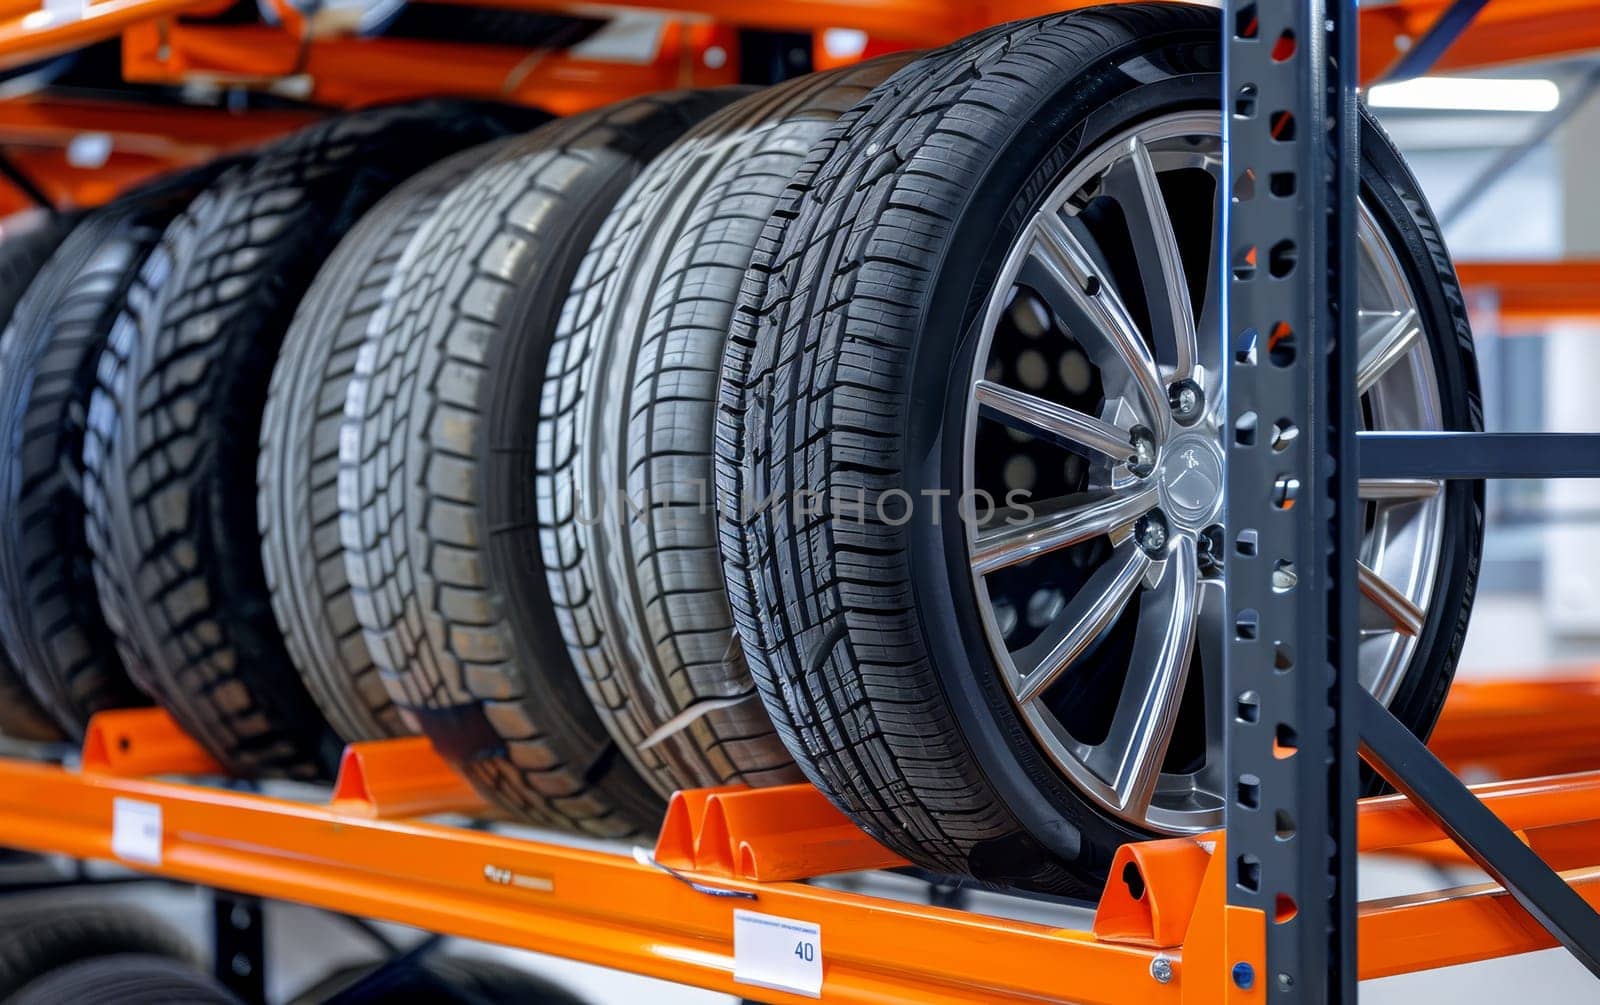 An array of sleek black tires is perfectly arranged on an orange industrial rack, highlighting a clean and modern display in an automotive setting